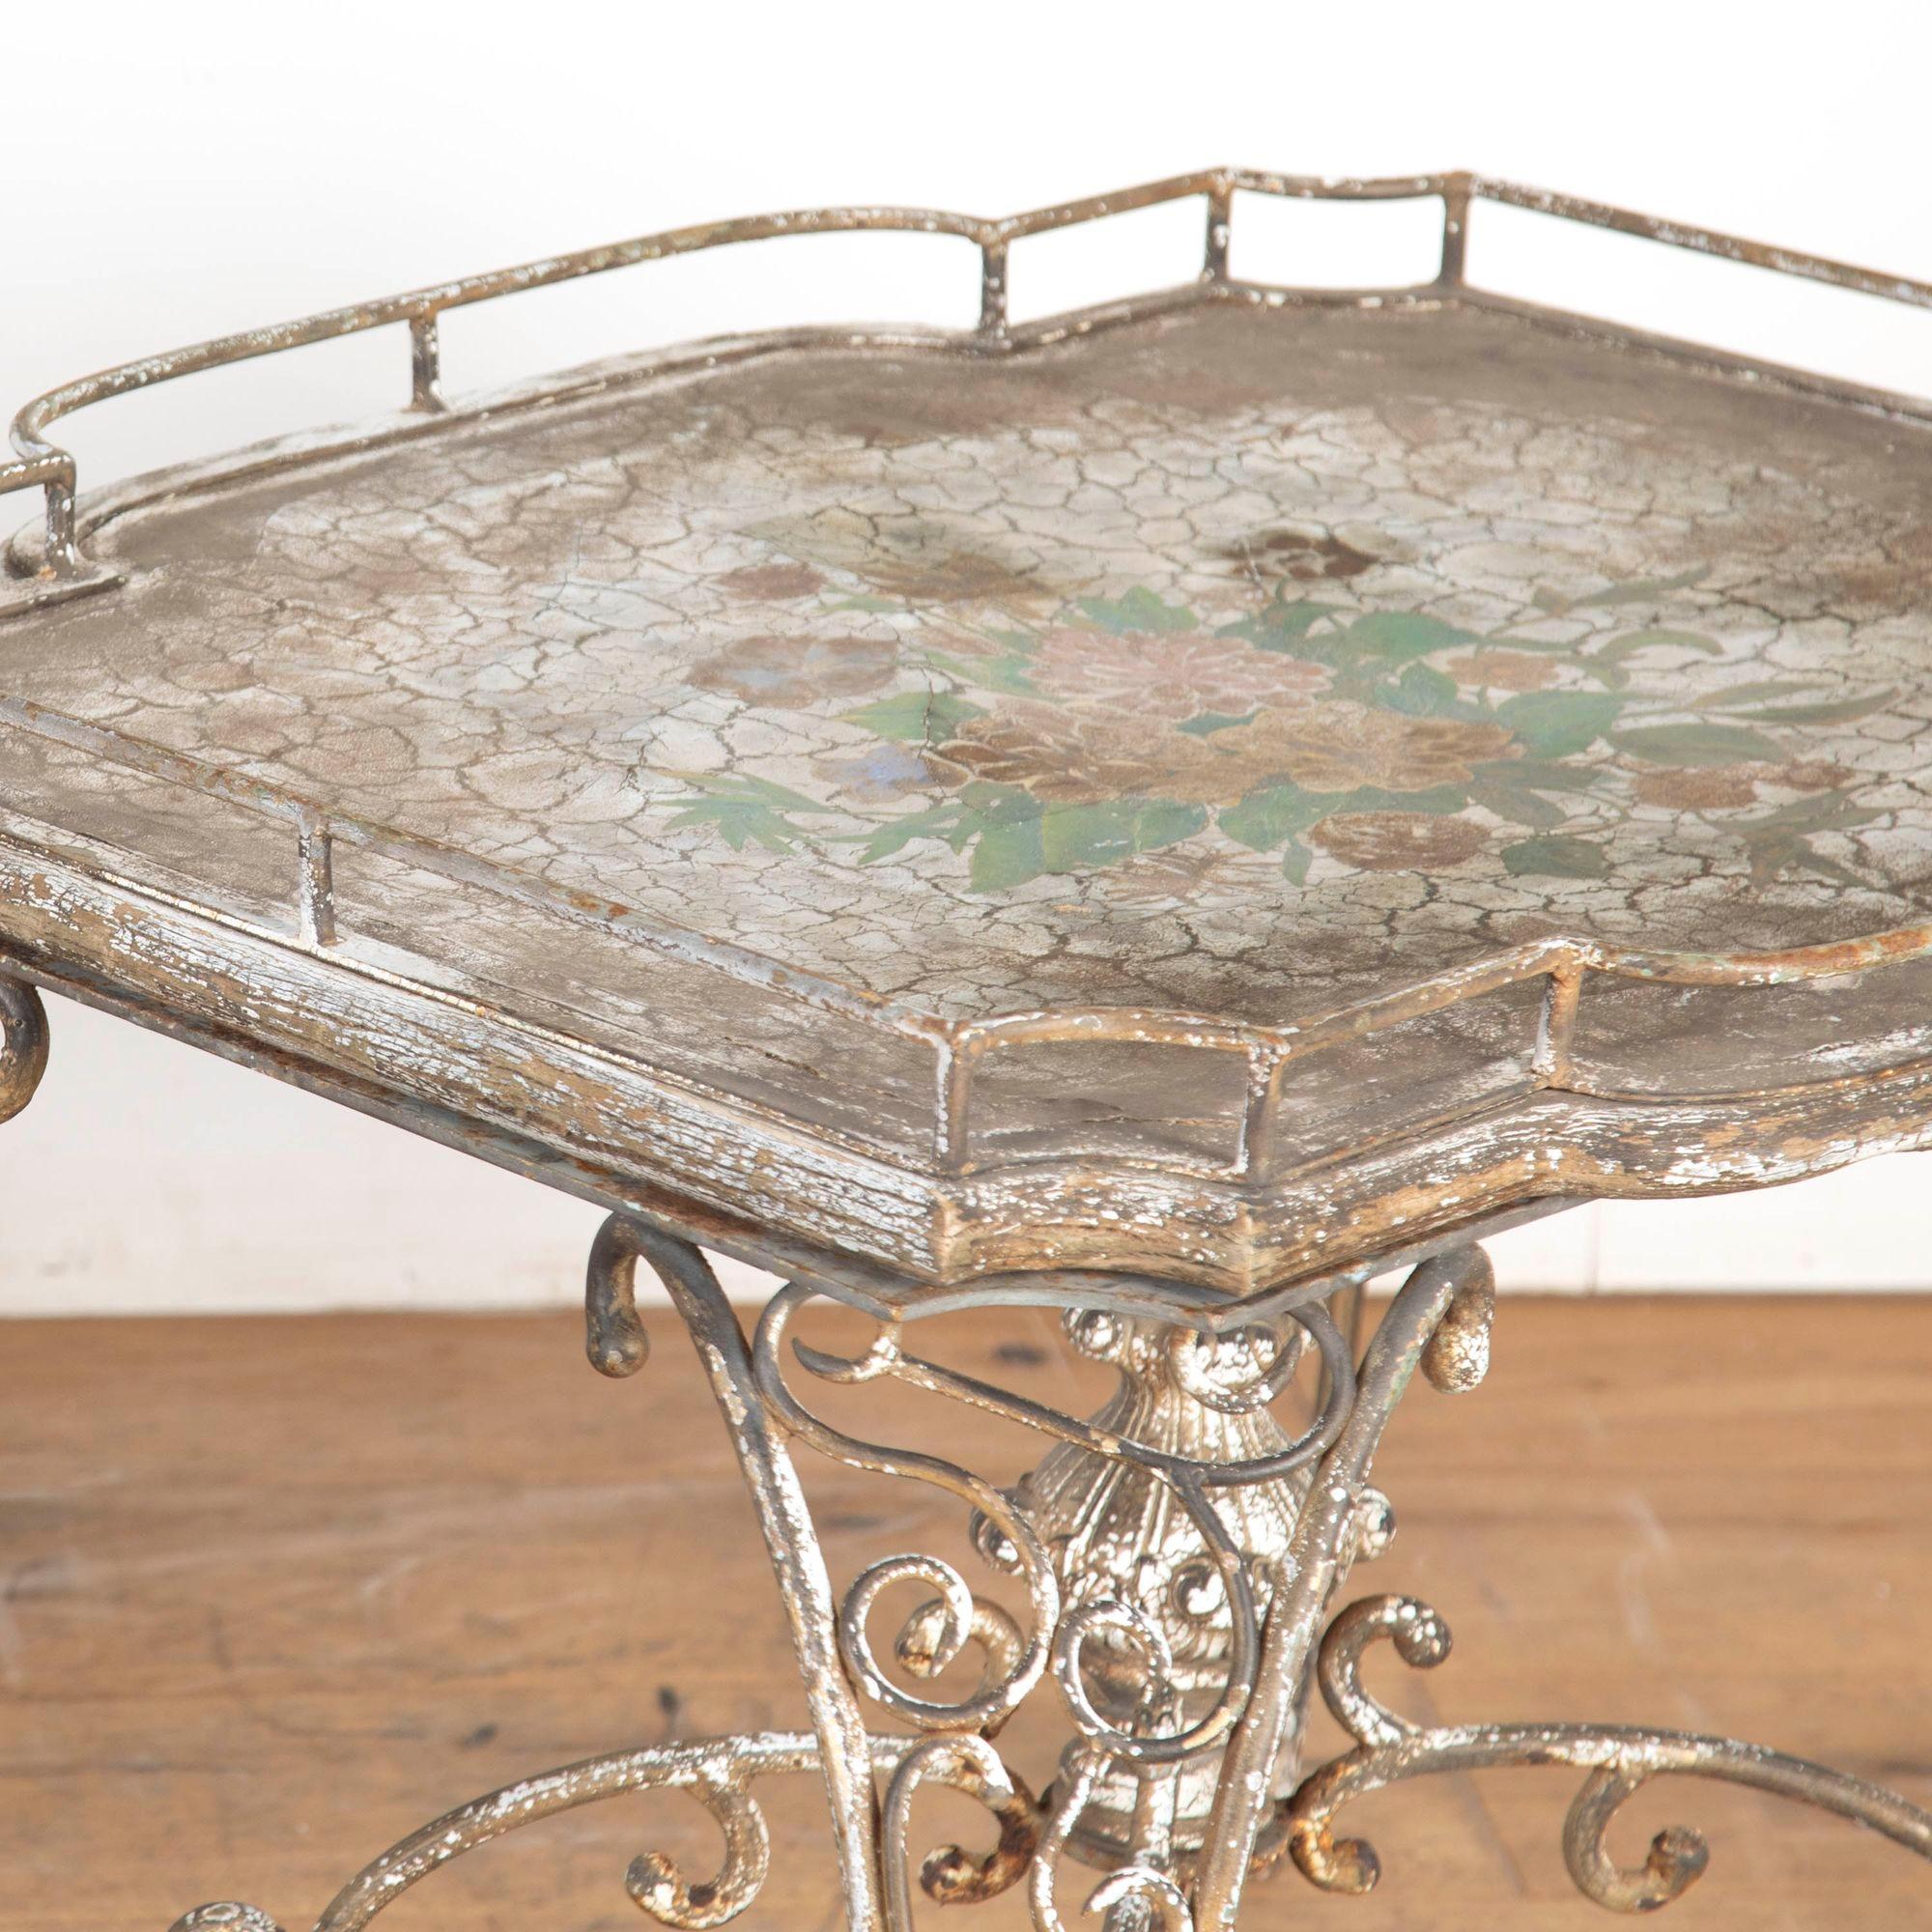 Pair of 20th Century American iron and papier mâché conservatory tables.
In the Chippendale manner, this pair of side tables feature wonderful detailing.